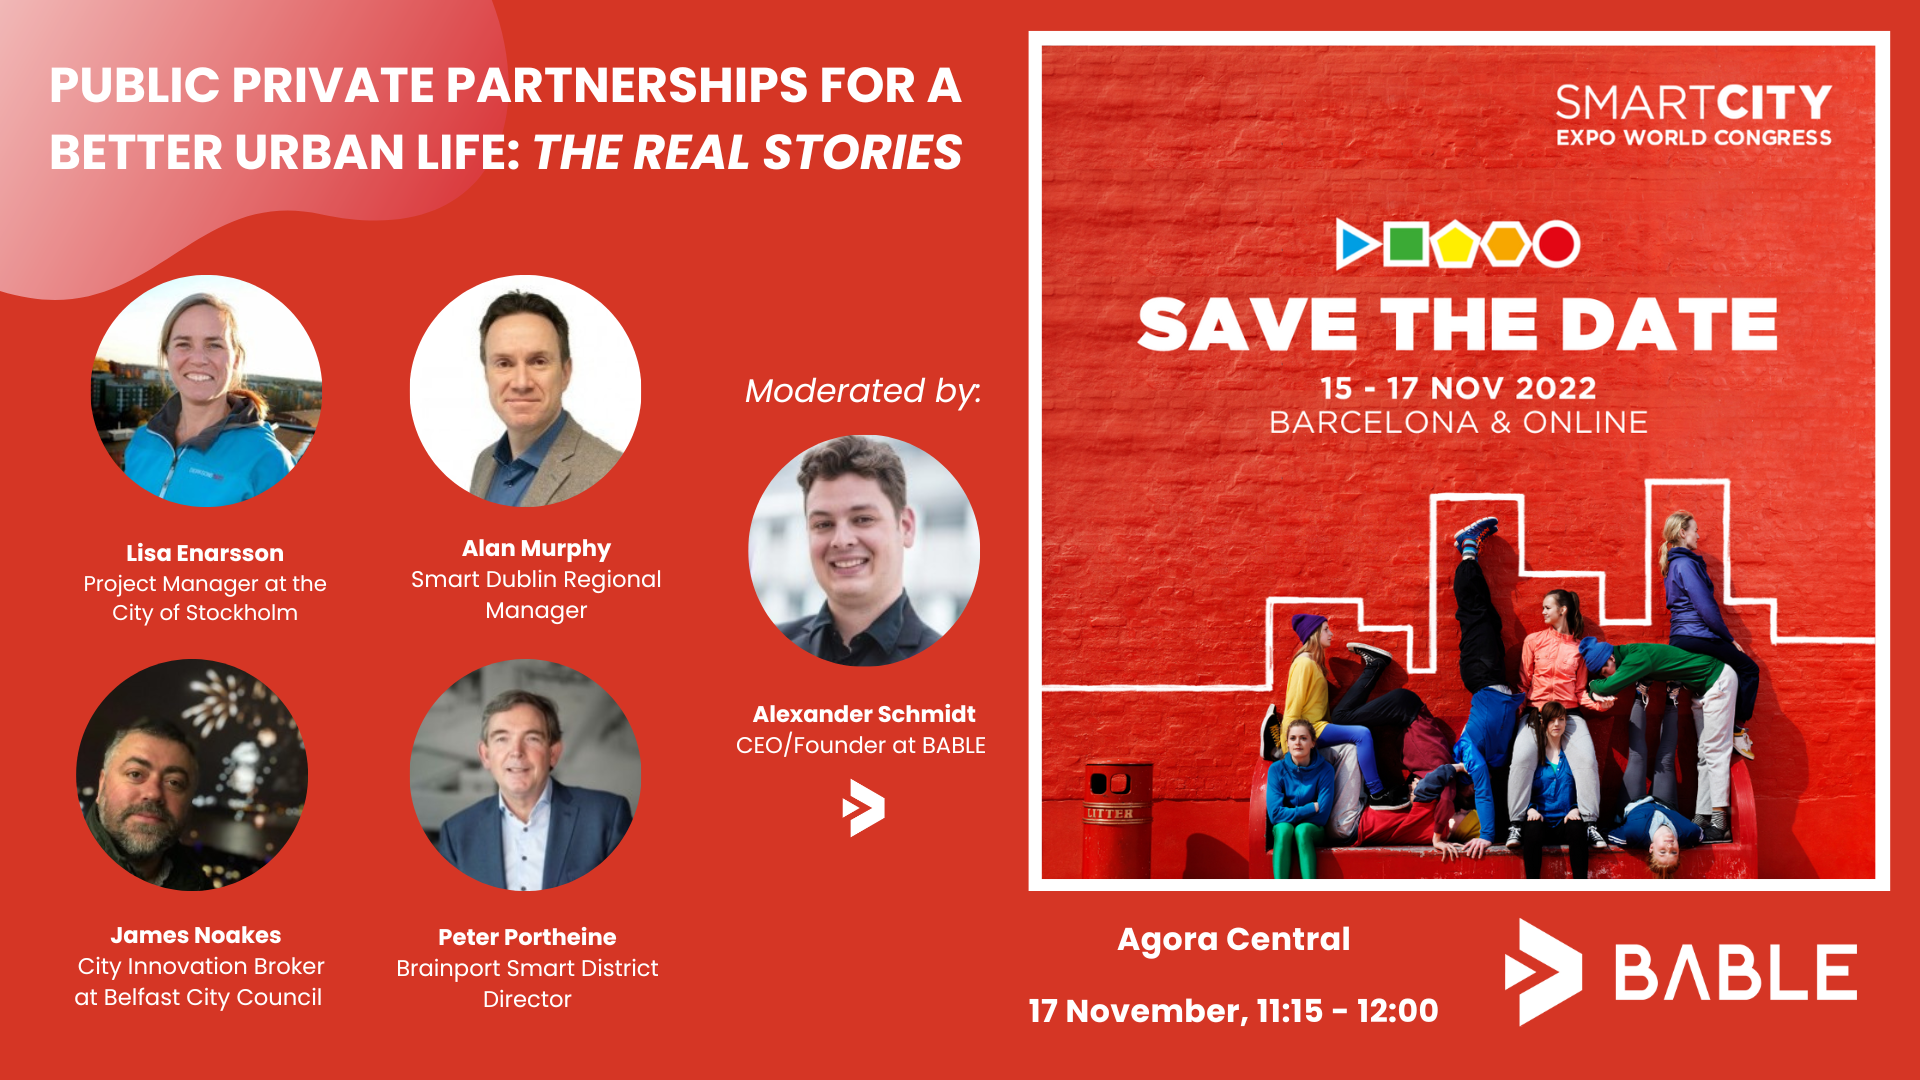 Public Private Partnerships for a Better Urban Life: The Real Stories  #SCEWC22